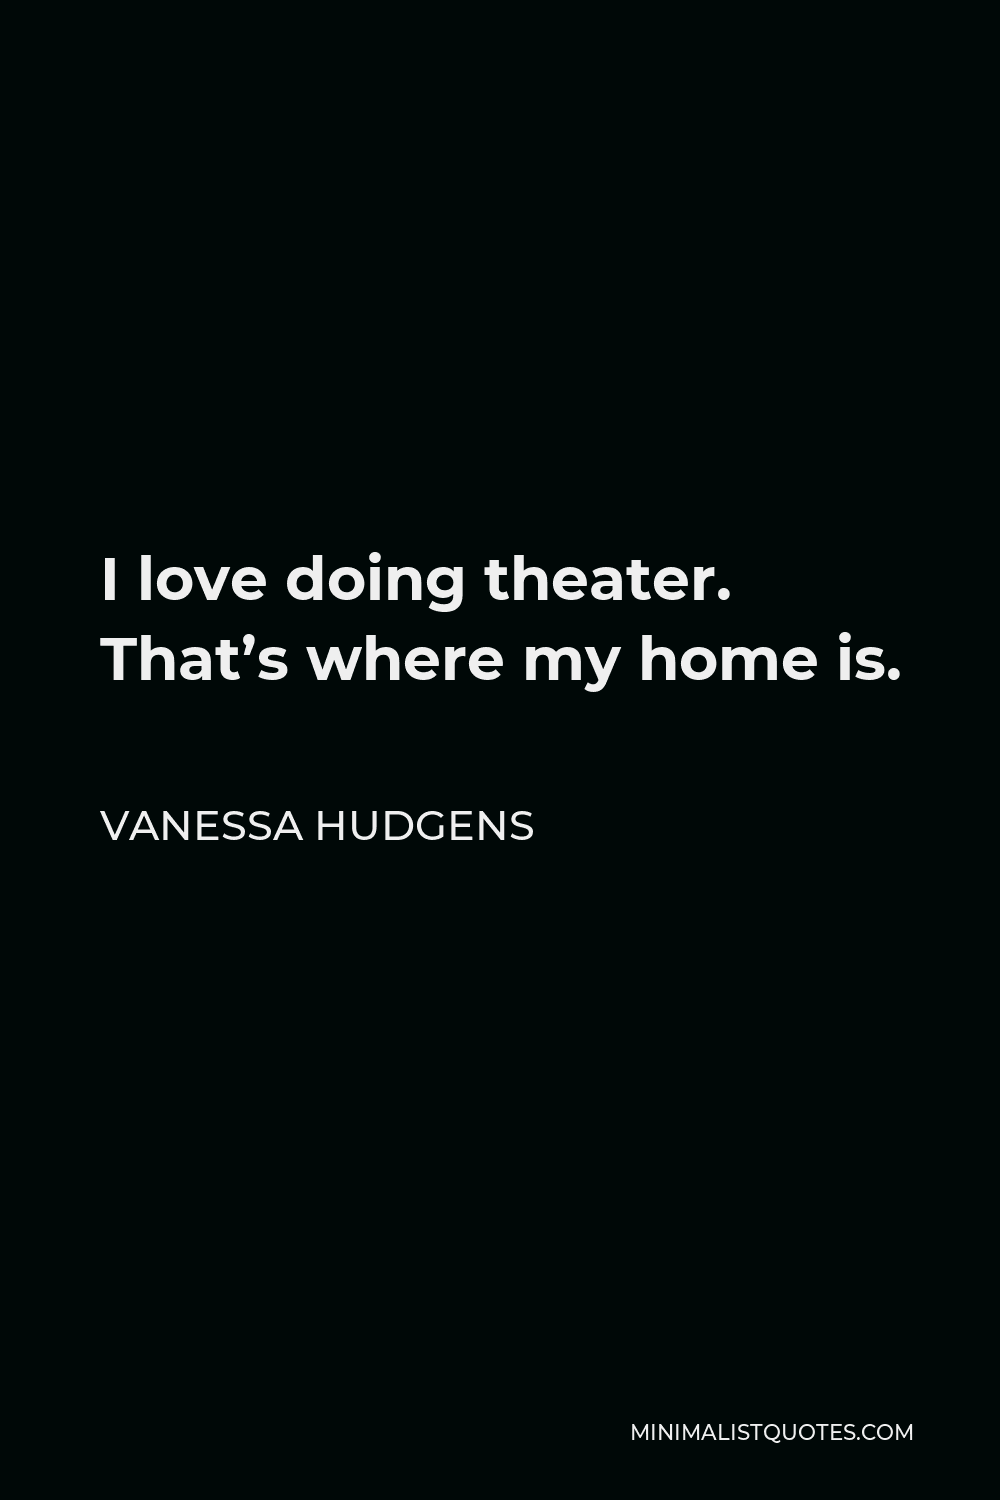 Vanessa Hudgens Quote - I love doing theater. That’s where my home is.